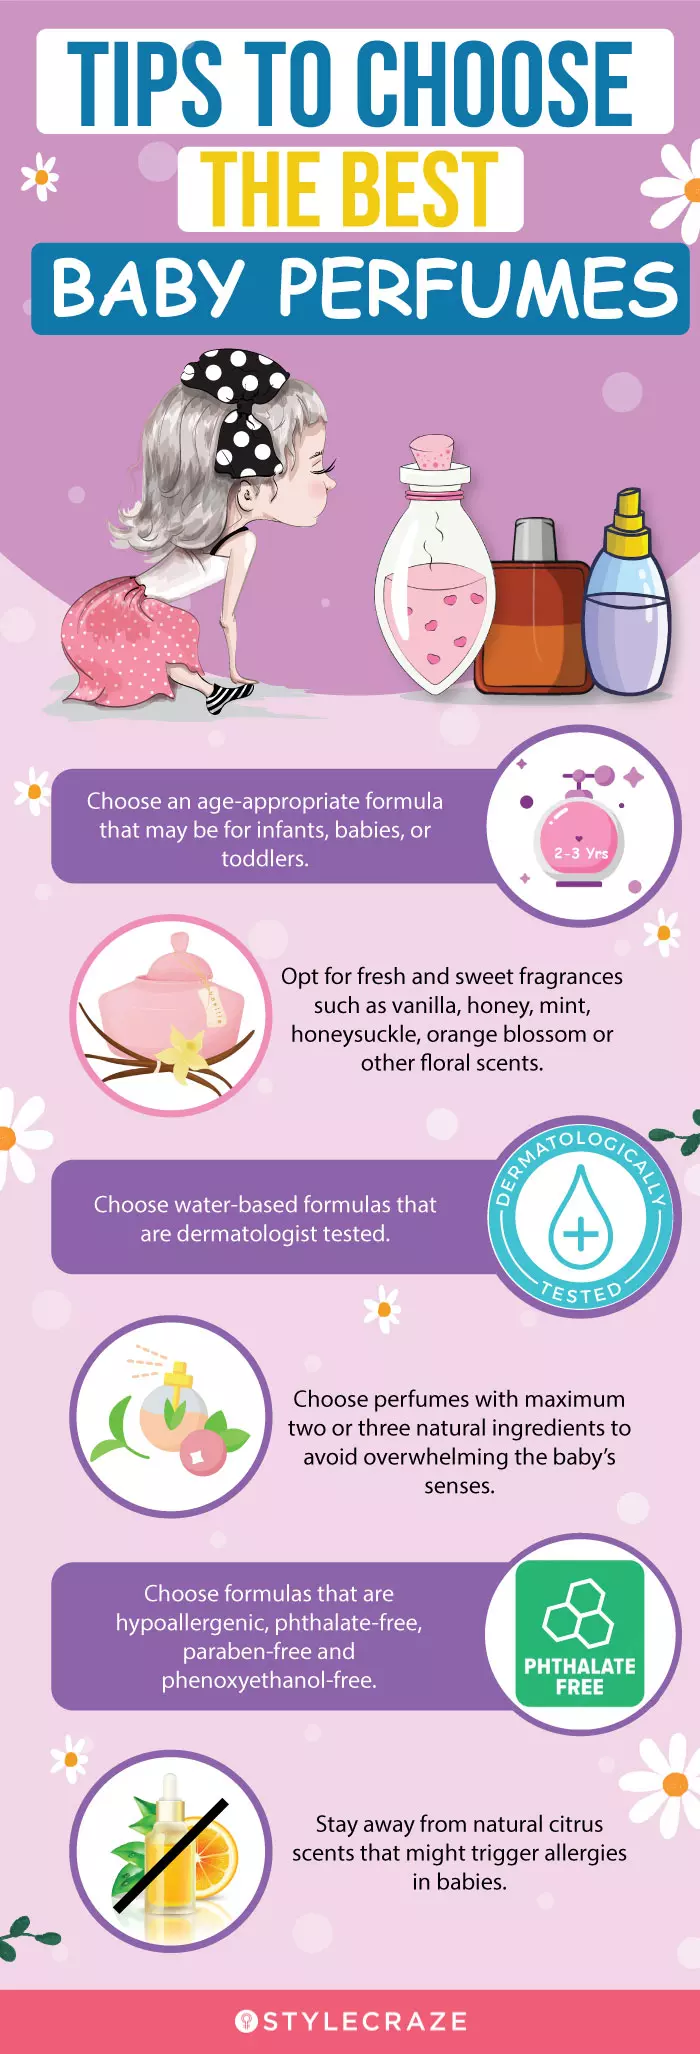 Tips To Choose The Best Baby Perfumes (infographic)